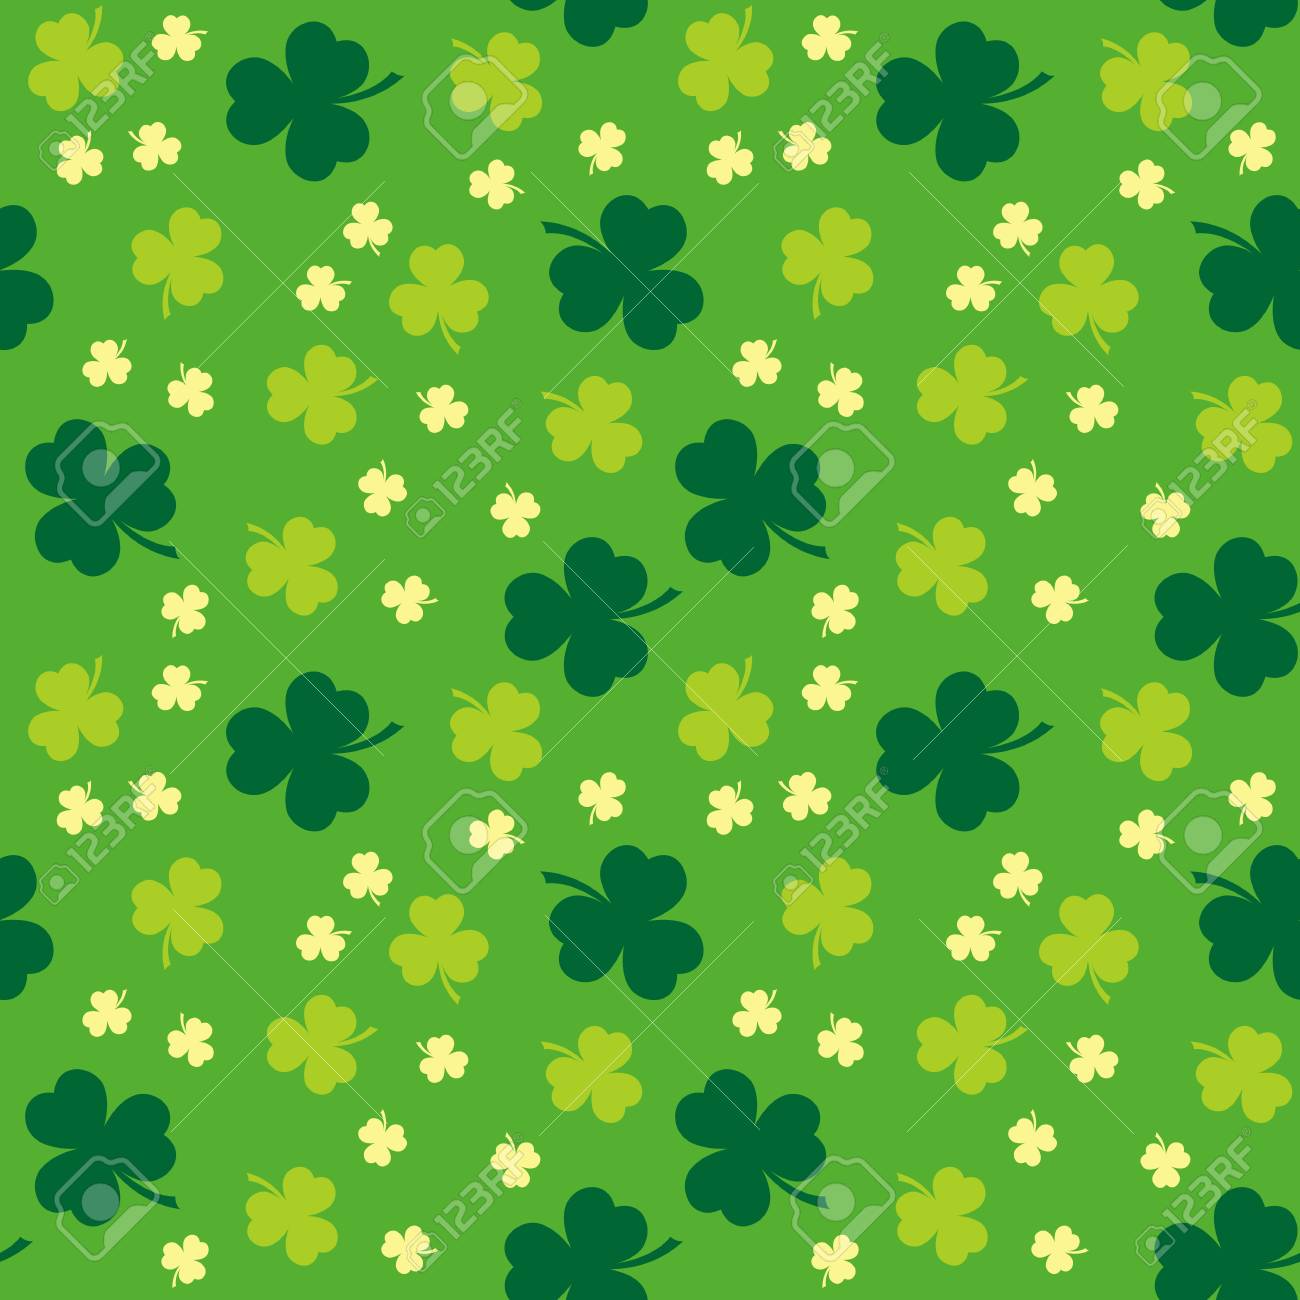 Shamrock Clover Cut Paper With Shadow Banner Or Background St